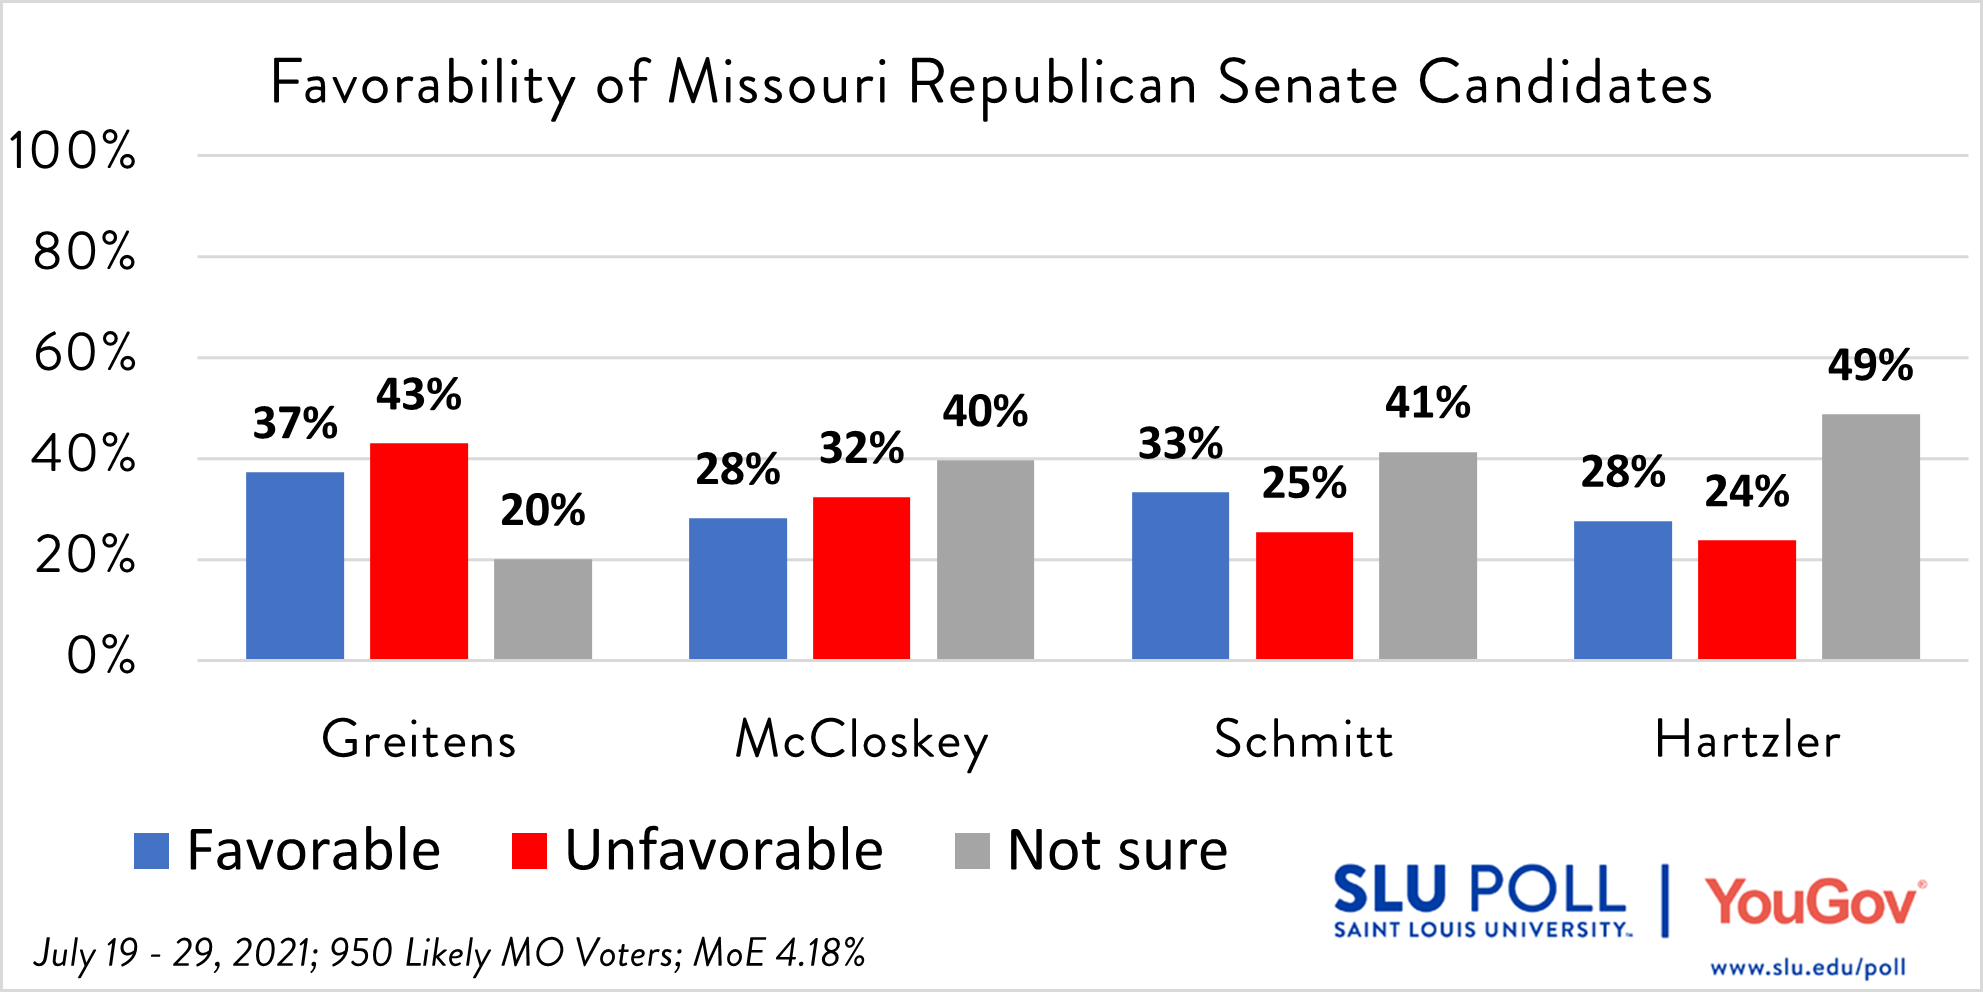 POLS007 Do you have a favorable or unfavorable opinion of the following people…Eric Greitens? - Very favorable: 16% - Somewhat favorable: 21% - Somewhat unfavorable: 12% - Very unfavorable: 31% - Not sure: 20%  POLS008 Do you have a favorable or unfavorable opinion of the following people…Eric Schmitt? - Very favorable: 11% - Somewhat favorable: 23% - Somewhat unfavorable: 10% - Very unfavorable: 15% - Not sure: 41%     POLS009 Do you have a favorable or unfavorable opinion of the following people…Ann Wagner? - Very favorable: 7% - Somewhat favorable: 18% - Somewhat unfavorable: 13% - Very unfavorable: 13% - Not sure: 49%  POLS010 Do you have a favorable or unfavorable opinion of the following people…Mark McCloskey? - Very favorable: 9% - Somewhat favorable: 19% - Somewhat unfavorable: 9% - Very unfavorable: 23% - Not sure: 40%  POLS011 Do you have a favorable or unfavorable opinion of the following people…Vicky Hartzler? - Very favorable: 9% - Somewhat favorable: 18% - Somewhat unfavorable: 11% - Very unfavorable: 13% - Not sure: 49%